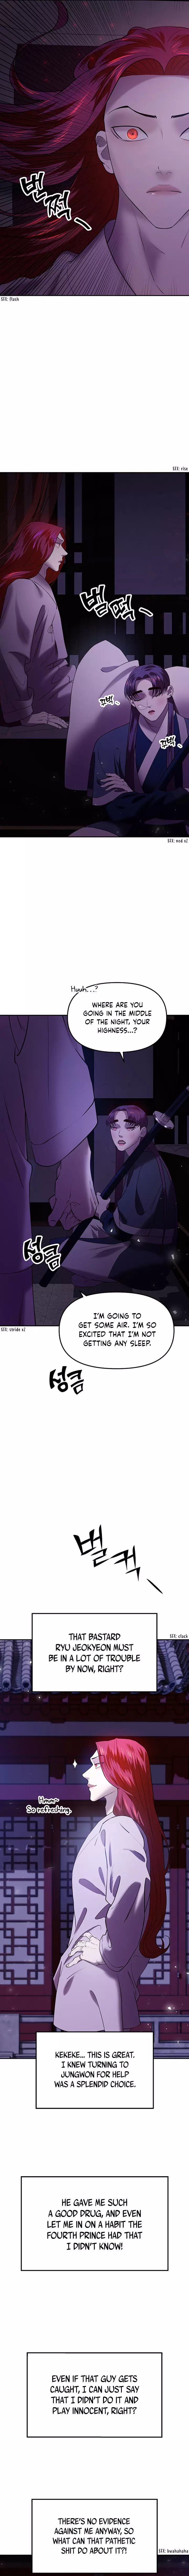 The Prince Of Myeolyeong - 28 page 10-f14d9e9d